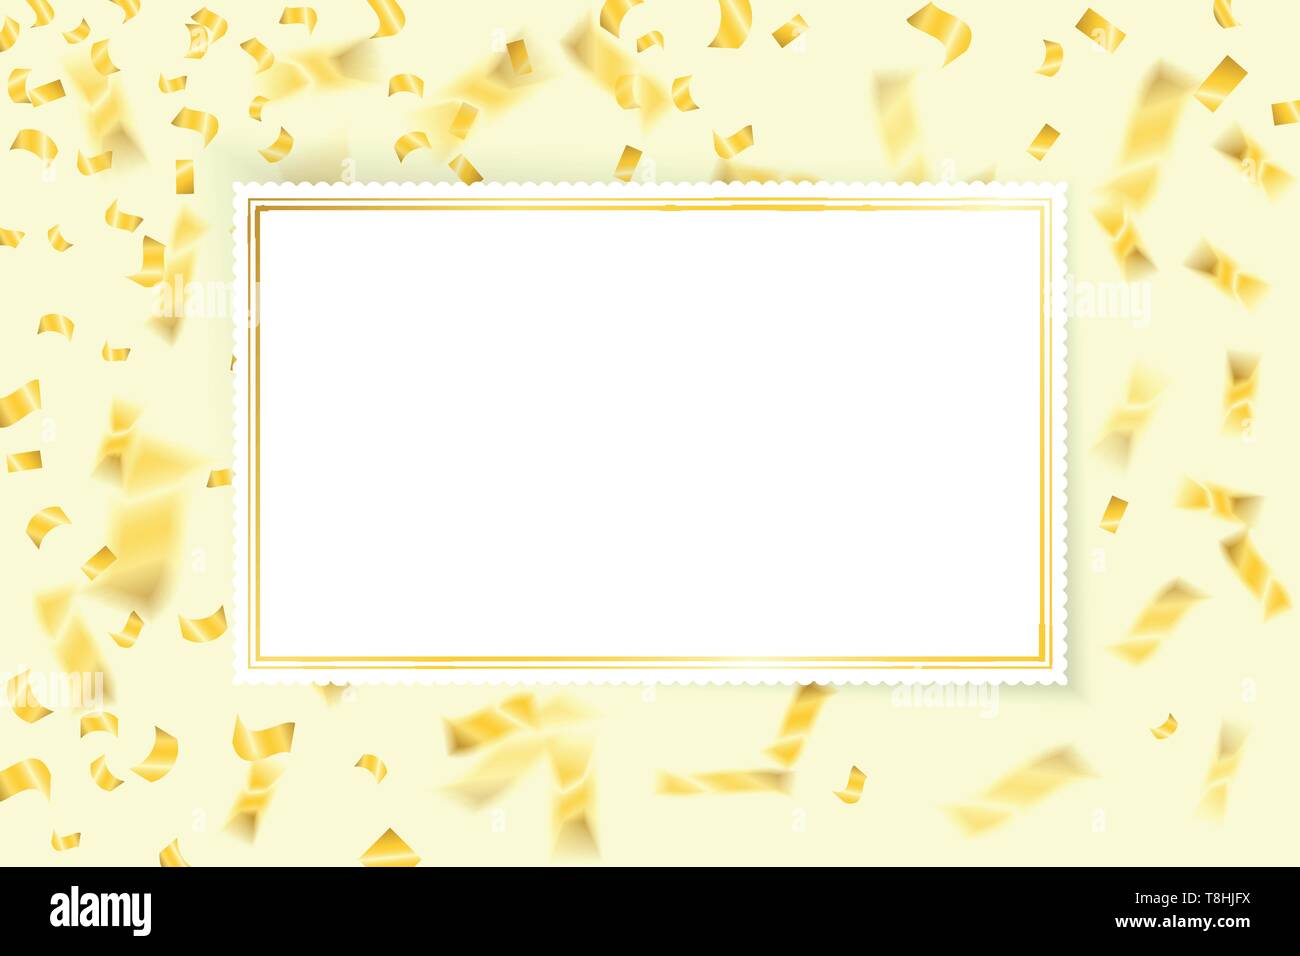 Flying golden confetti isolated transparent background Stock Vector